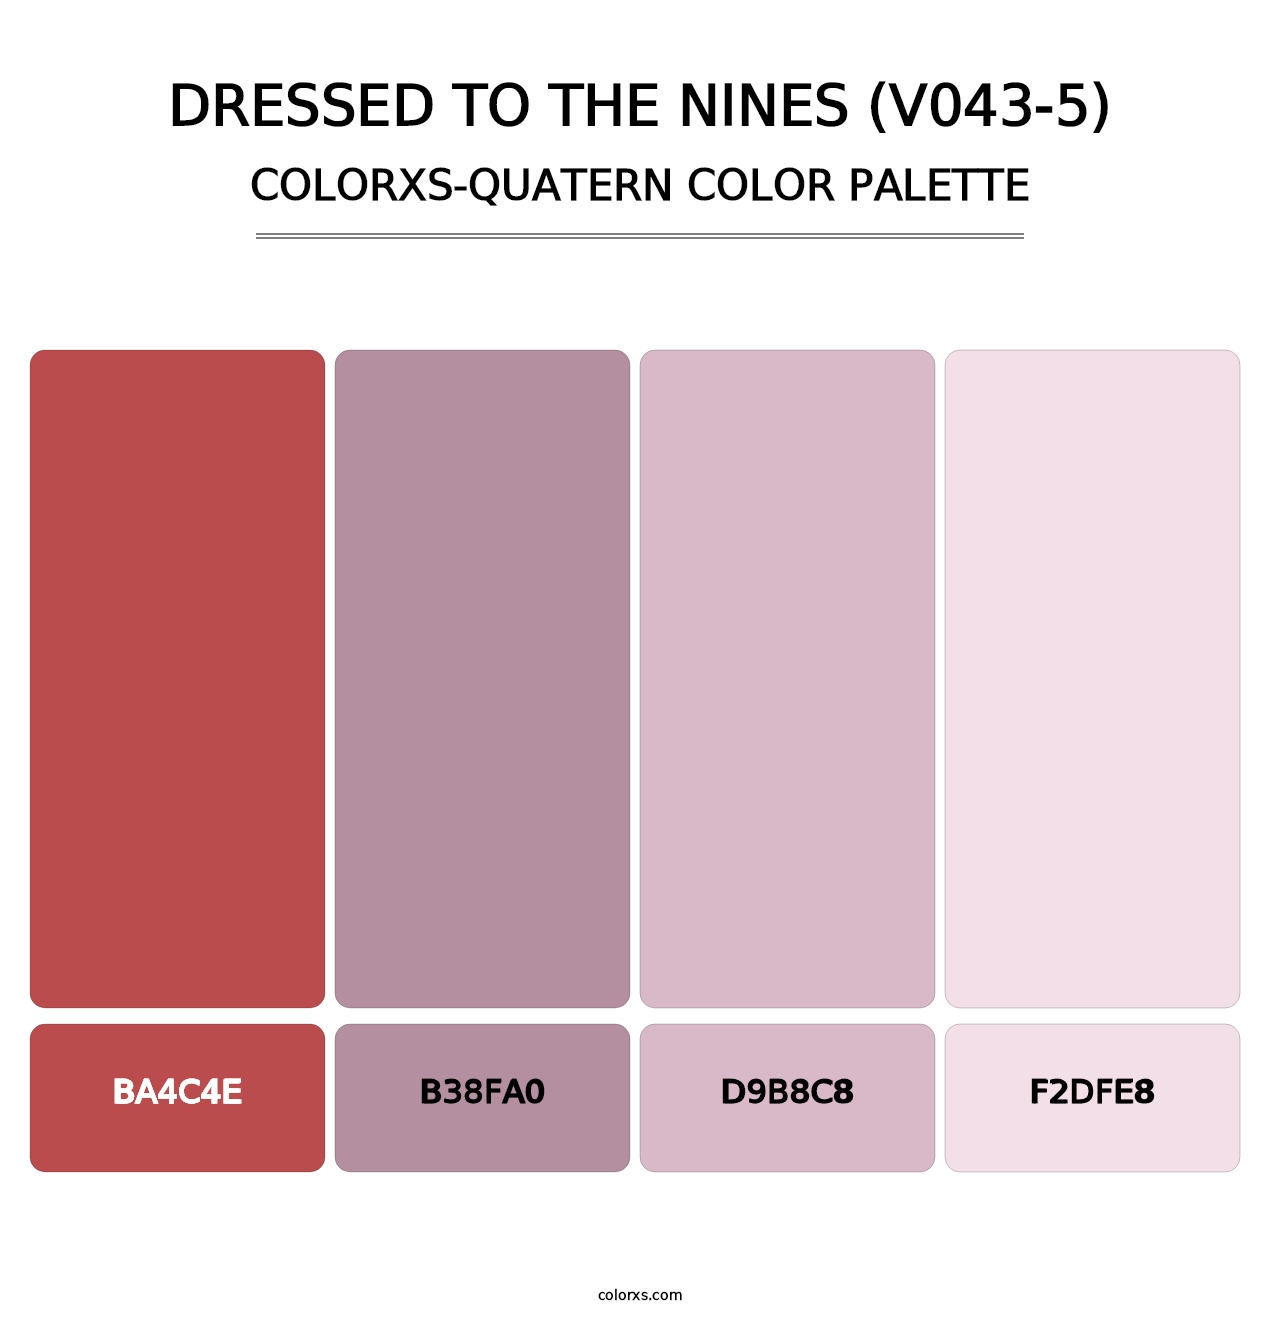 Dressed to the Nines (V043-5) - Colorxs Quatern Palette